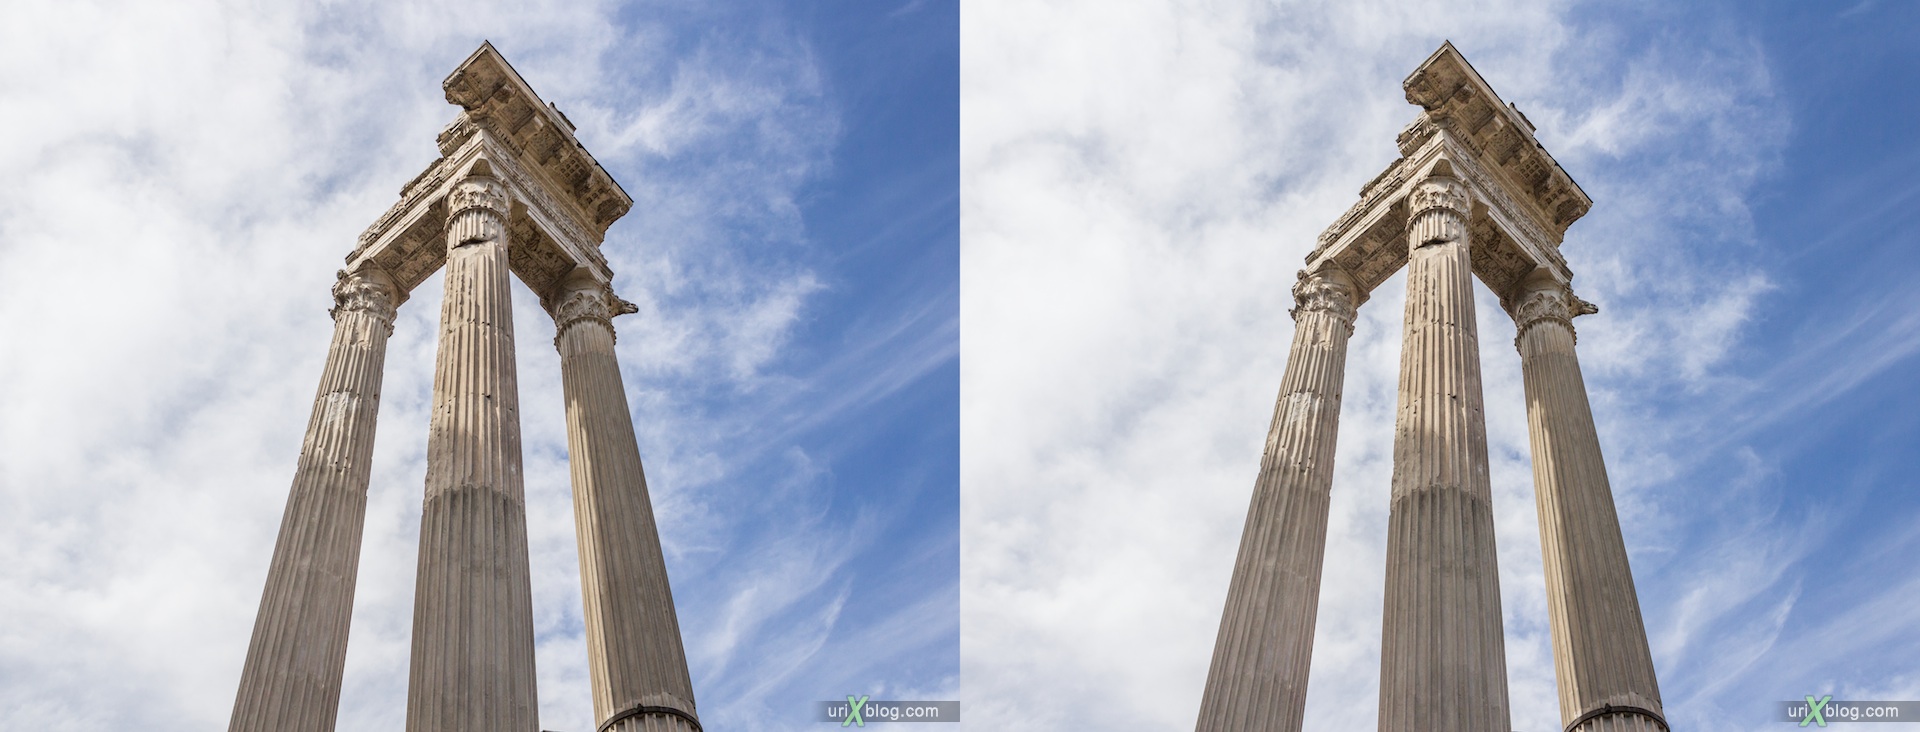 2012, Temple of Apollo Sosianus, Theater of Marcellus, Rome, Italy, 3D, stereo pair, cross-eyed, crossview, cross view stereo pair